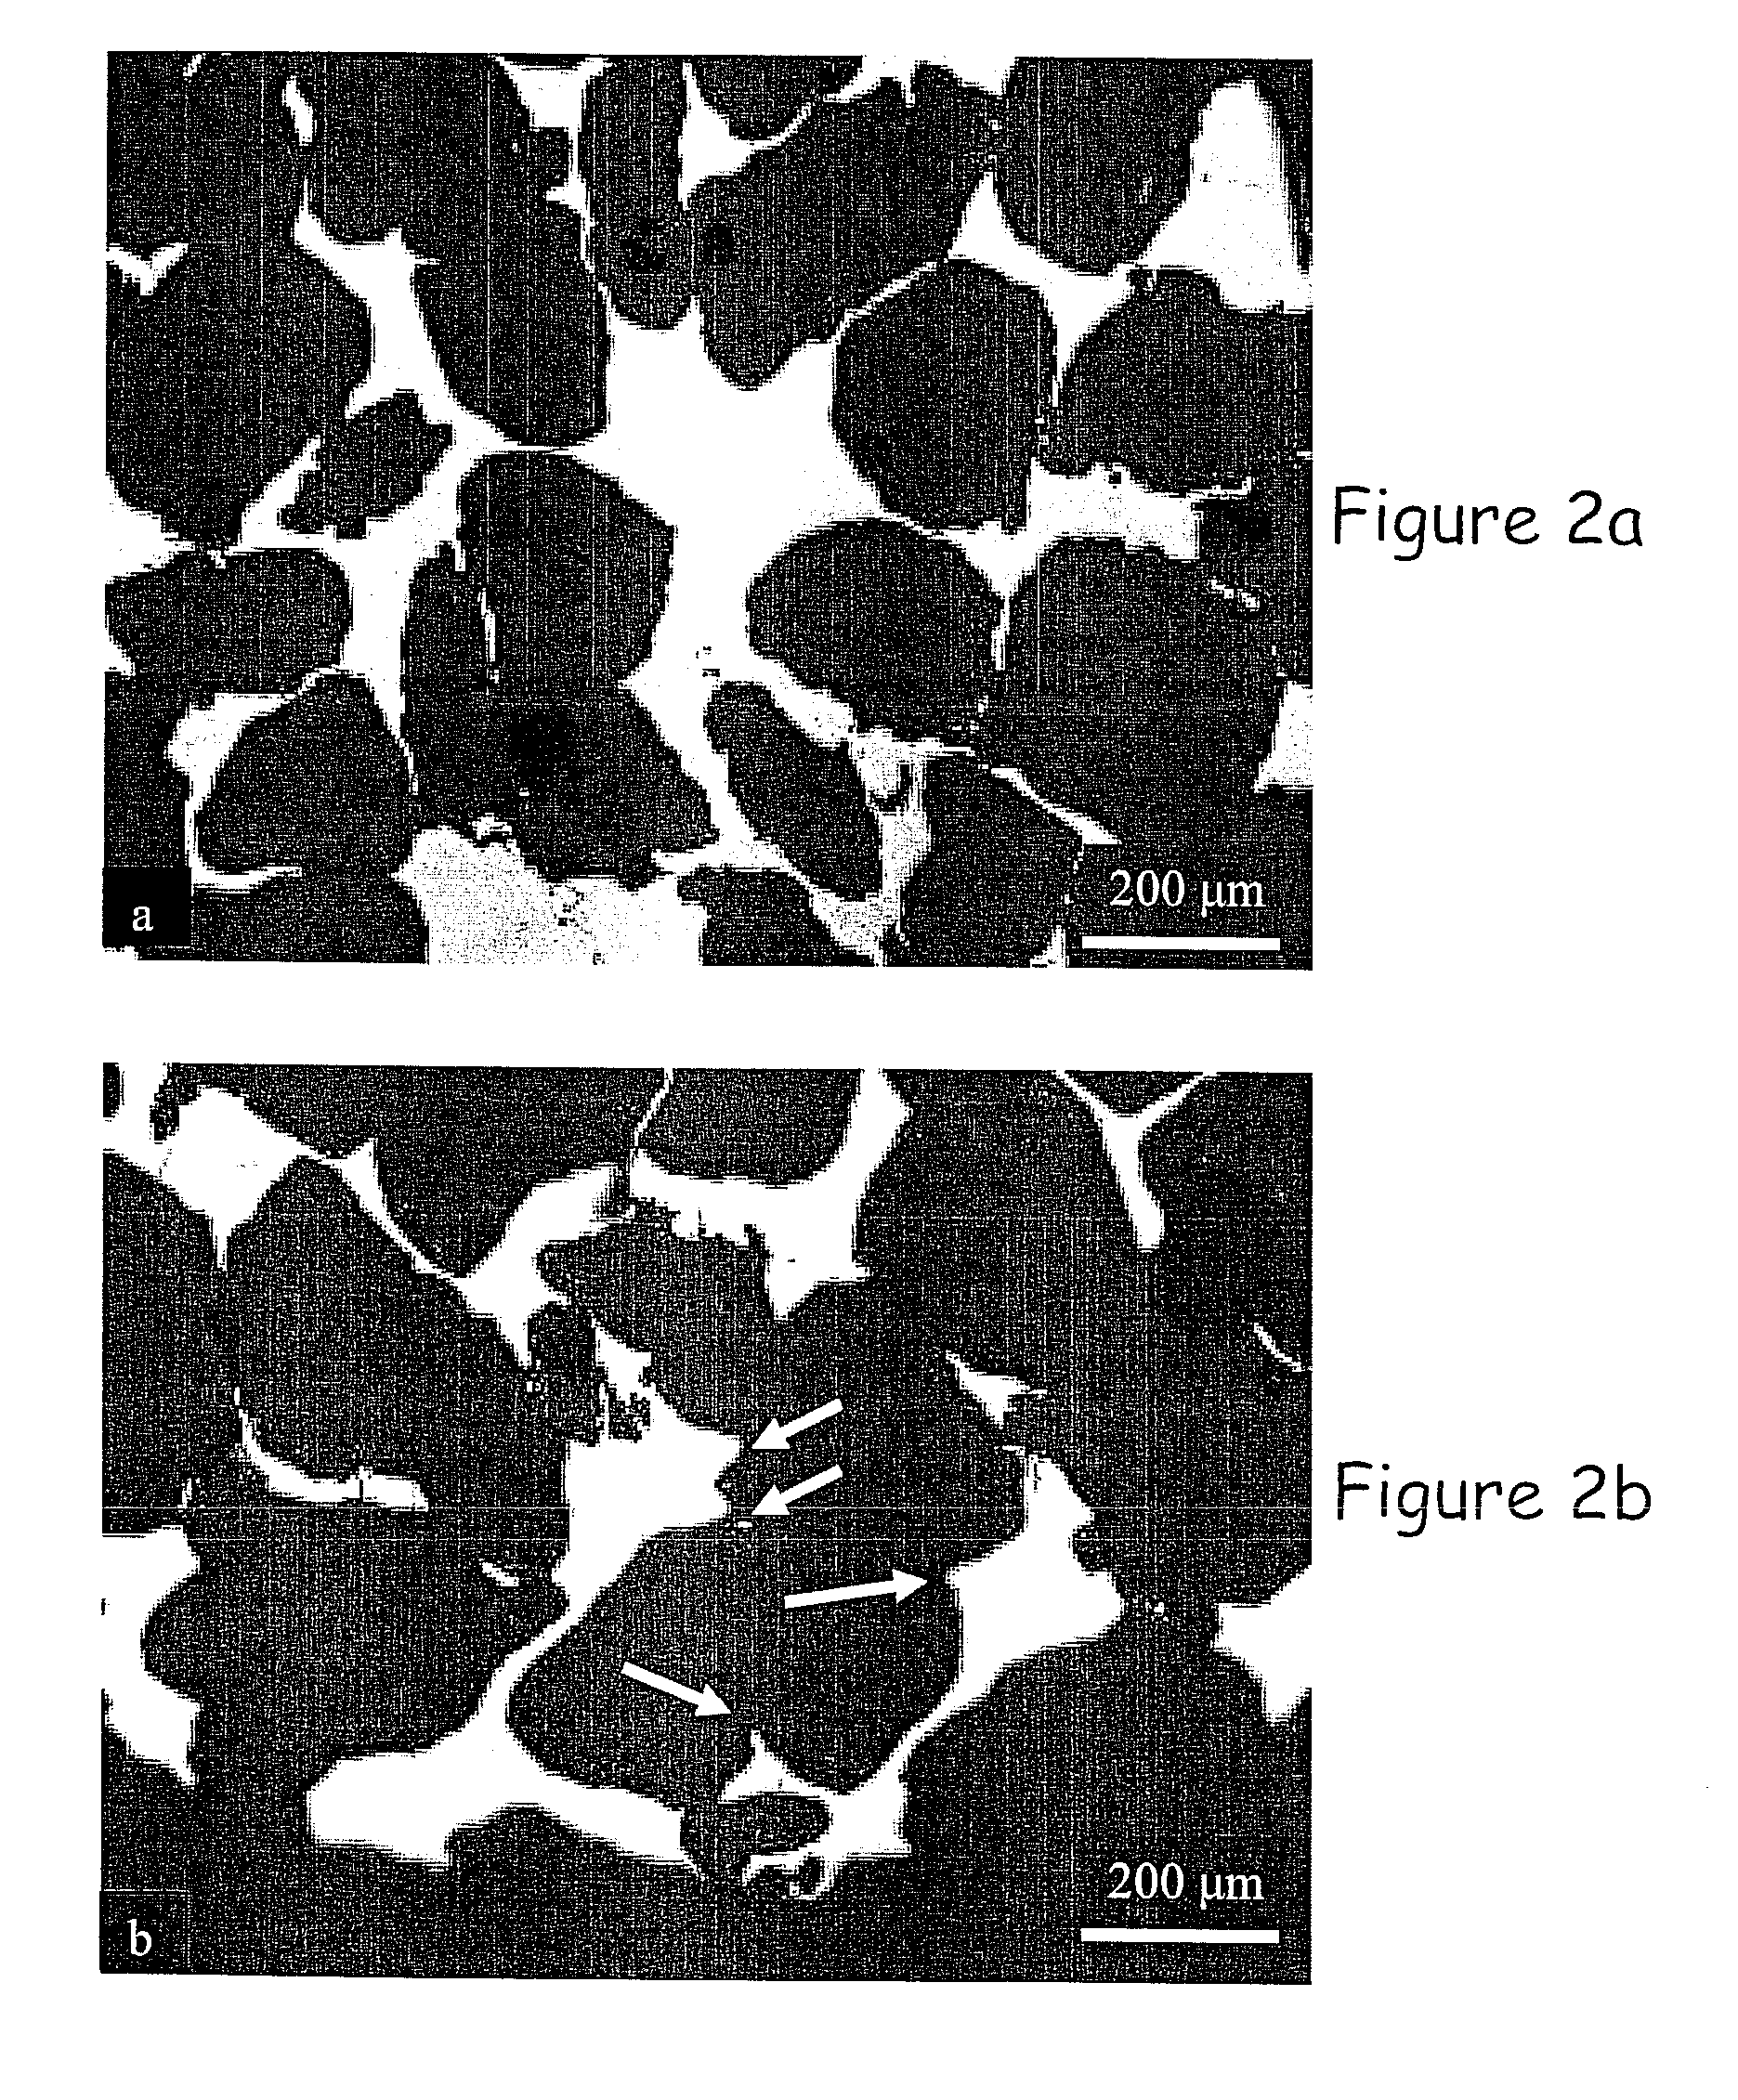 Magnetic material with large magnetic-field-induced deformation